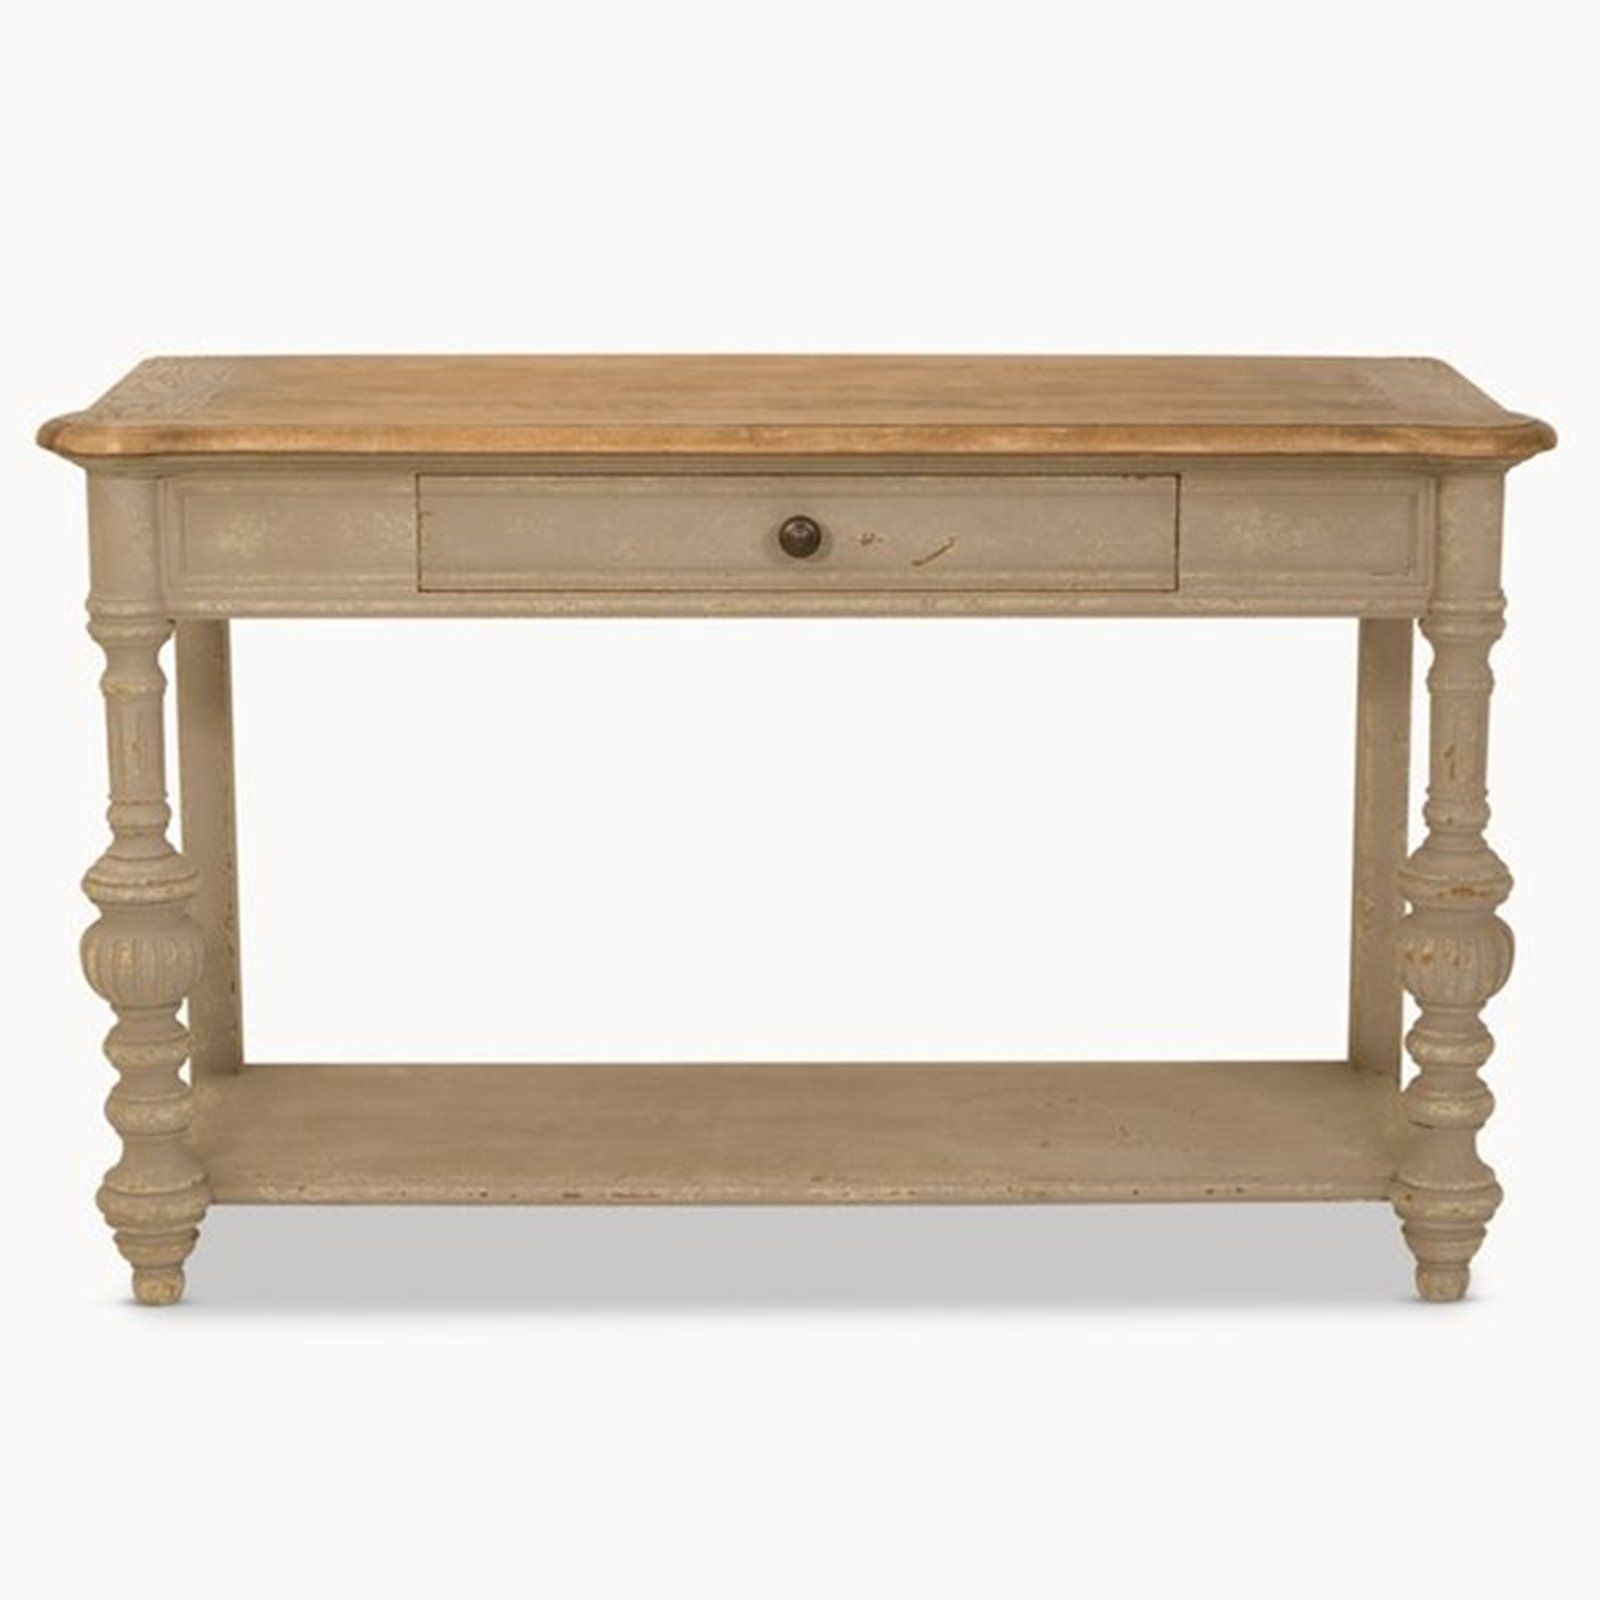 Vintage Gray Oak Coffee Tables In Well Known Colonial Grey Vintage Oak Console Table (View 9 of 20)